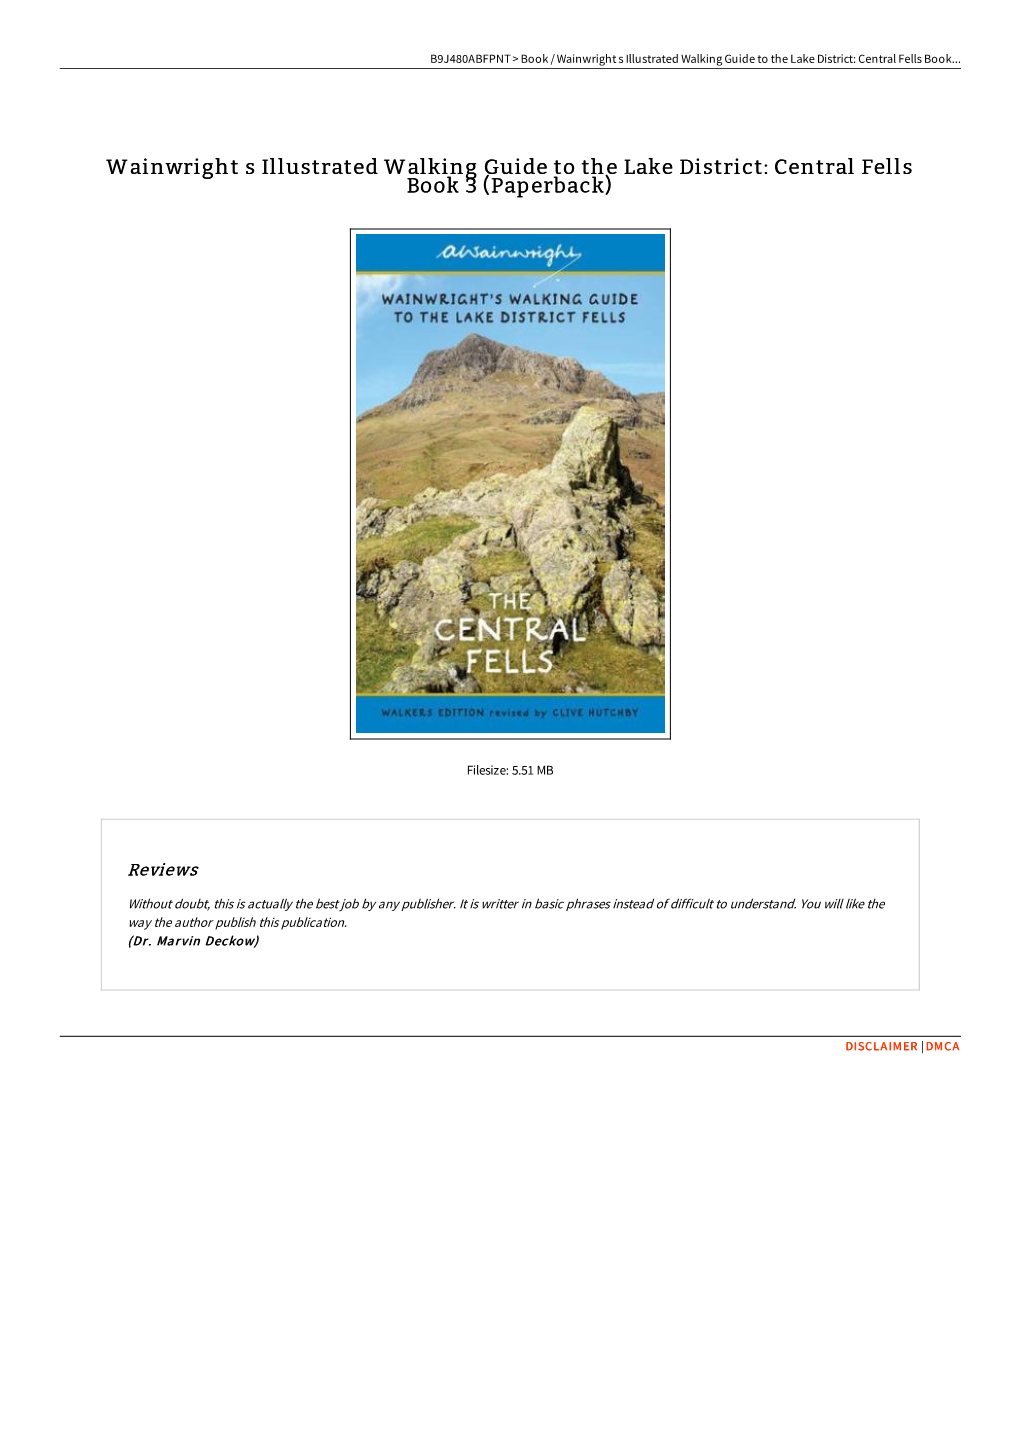 Download Ebook &gt; Wainwright S Illustrated Walking Guide to The